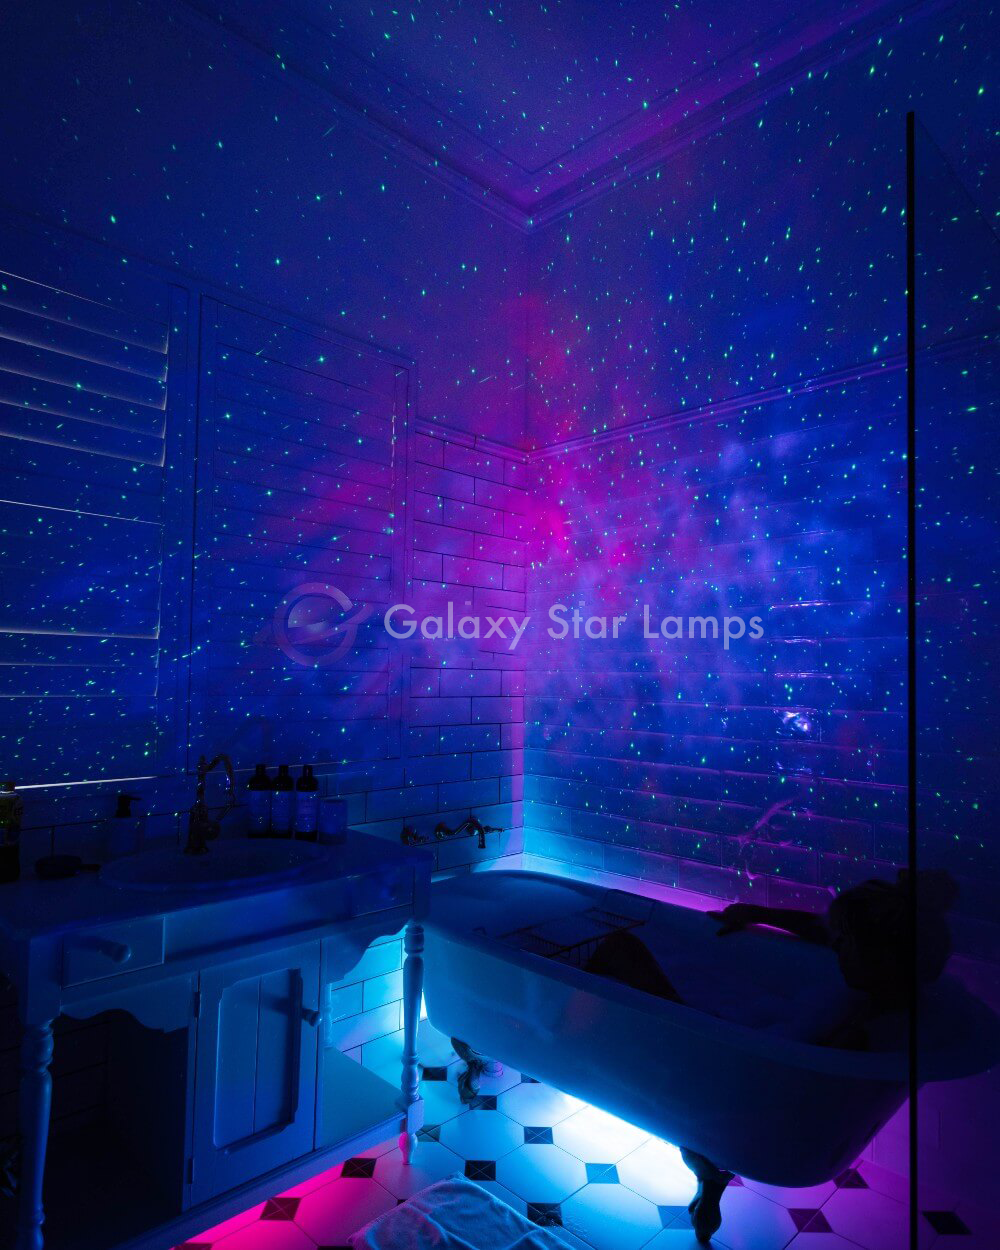 The Largest Coverage Area Galaxy Night Lights Projector 2.0, Star Projector